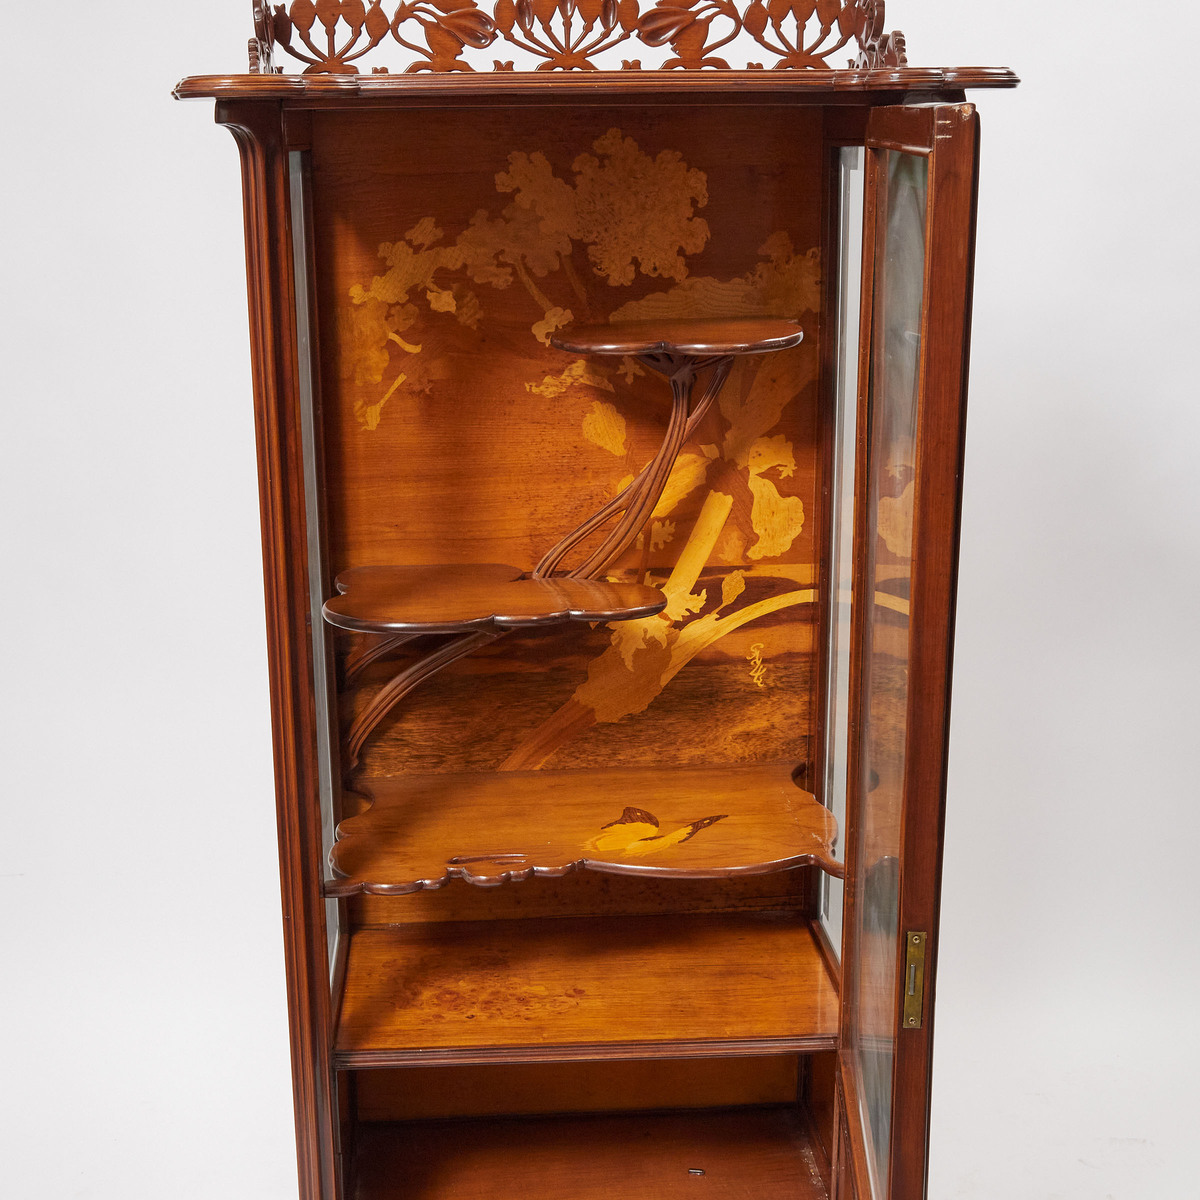 Émile Gallé Carved Walnut and Fruitwood Marquetry Vitrine de Salon, c.1900, 66.5 x 29.5 x 20.25 in — - Image 3 of 3